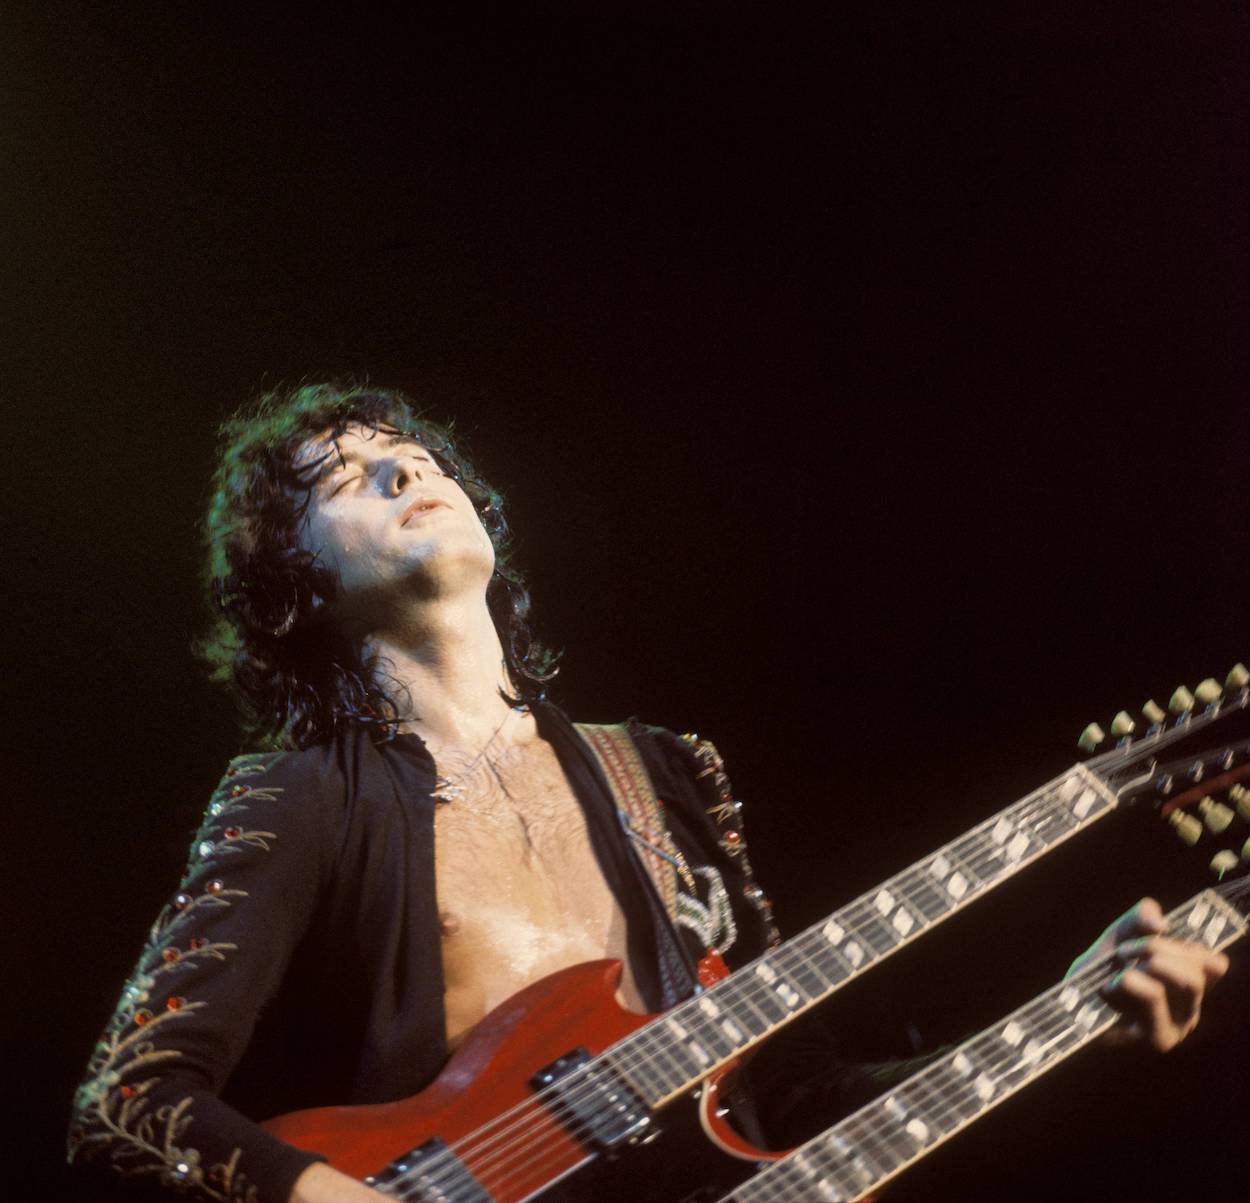 Jimmy Page plays guitar during a 1973 Led Zeppelin concert at Madison Square Garden, footage of which appeared in 'The Song Remains the Same' movie, along with Page's house.